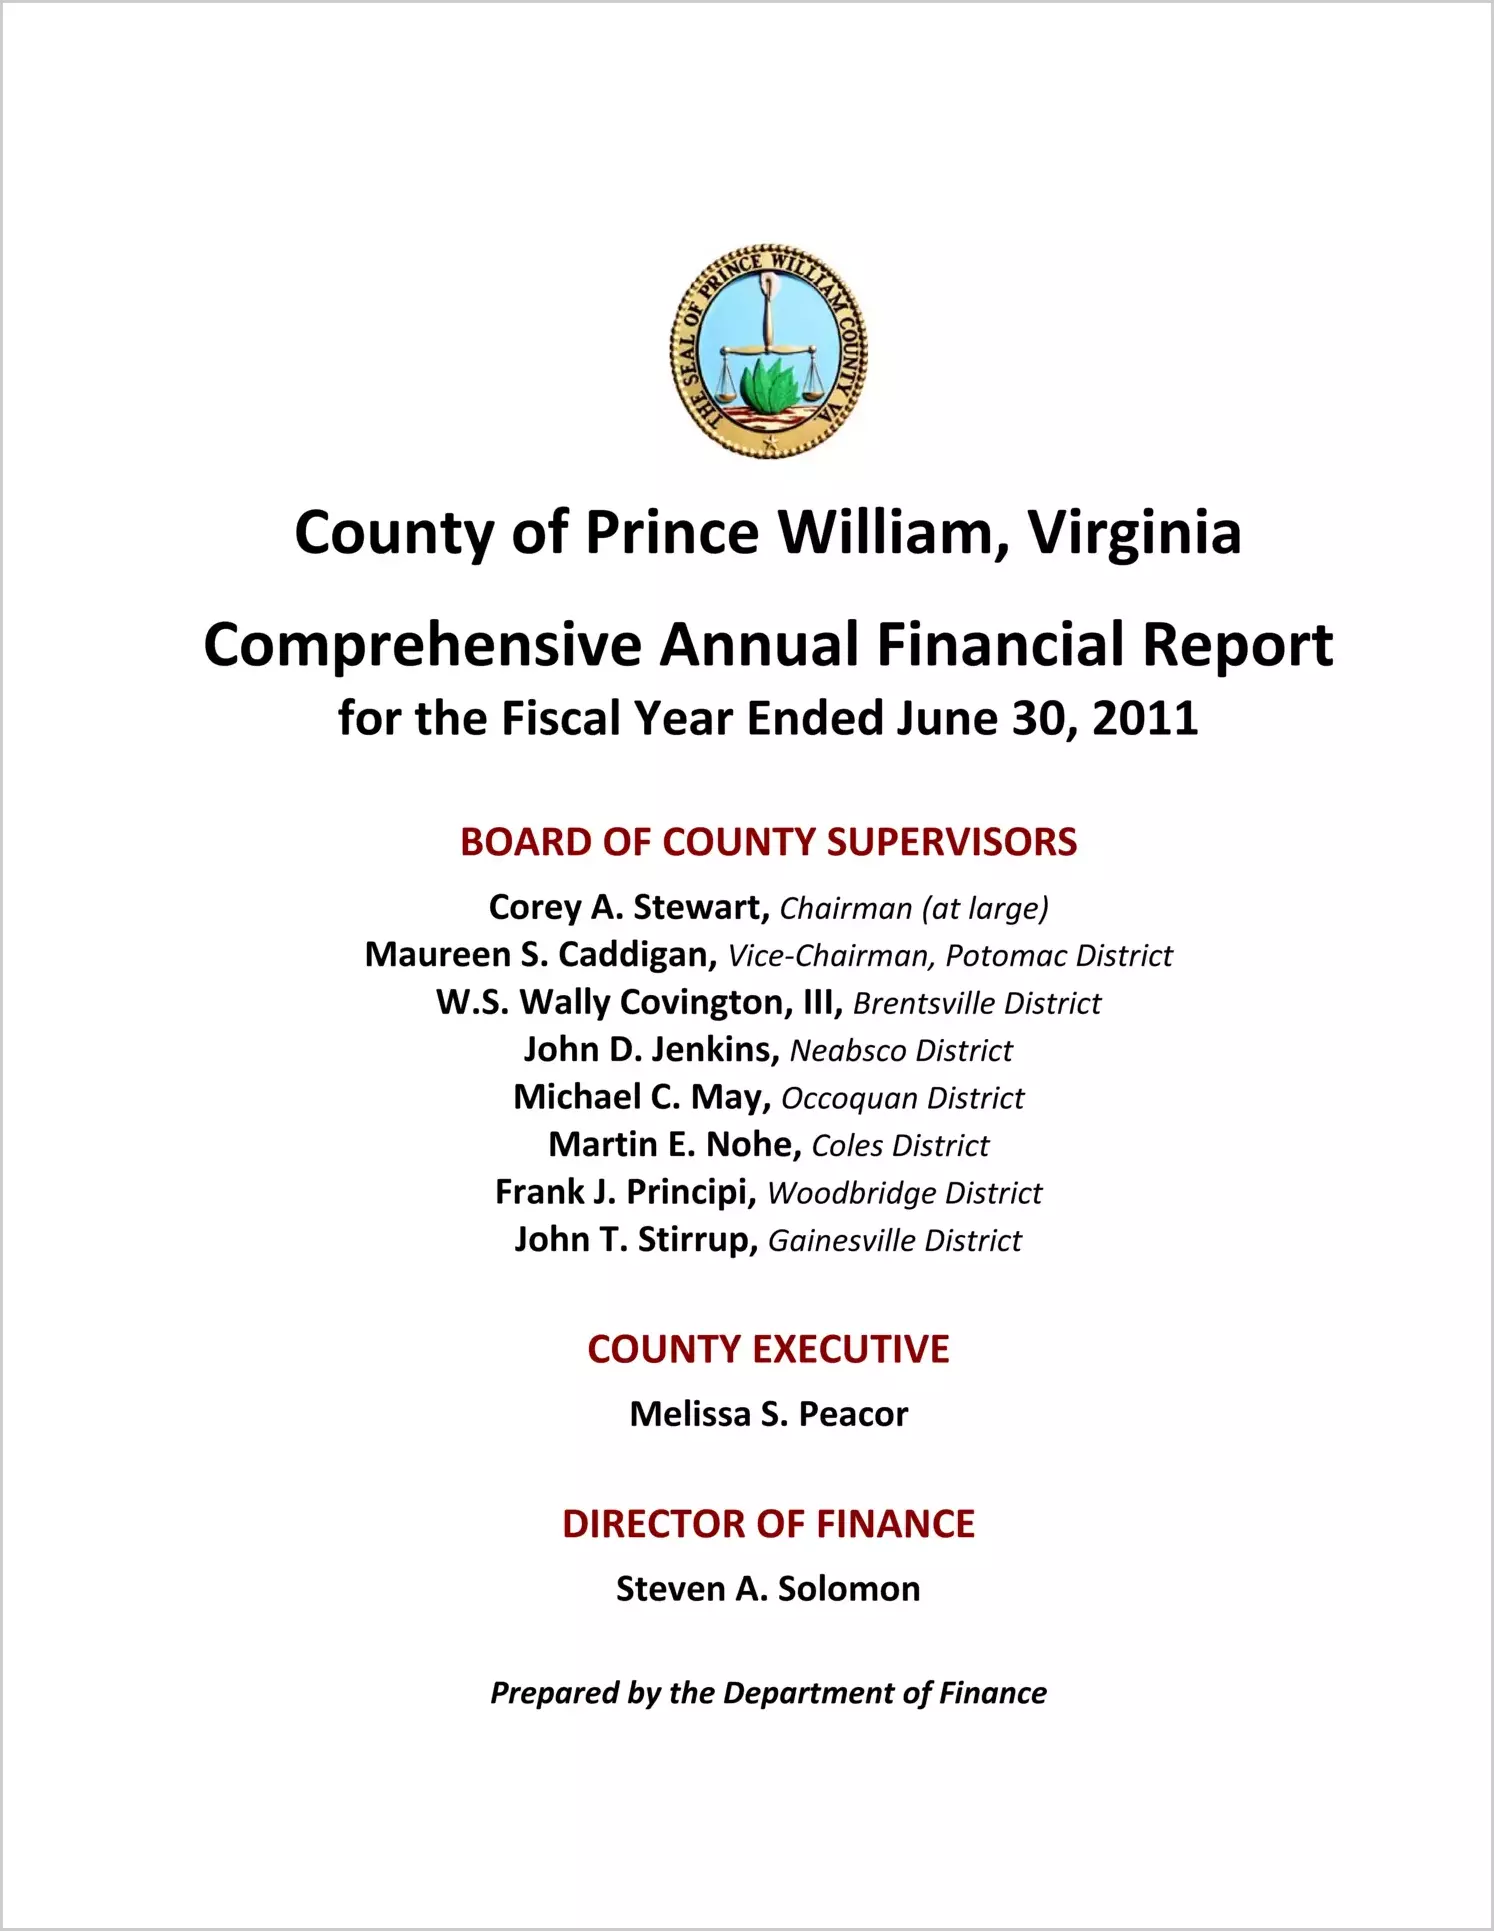 2011 Annual Financial Report for County of Prince William